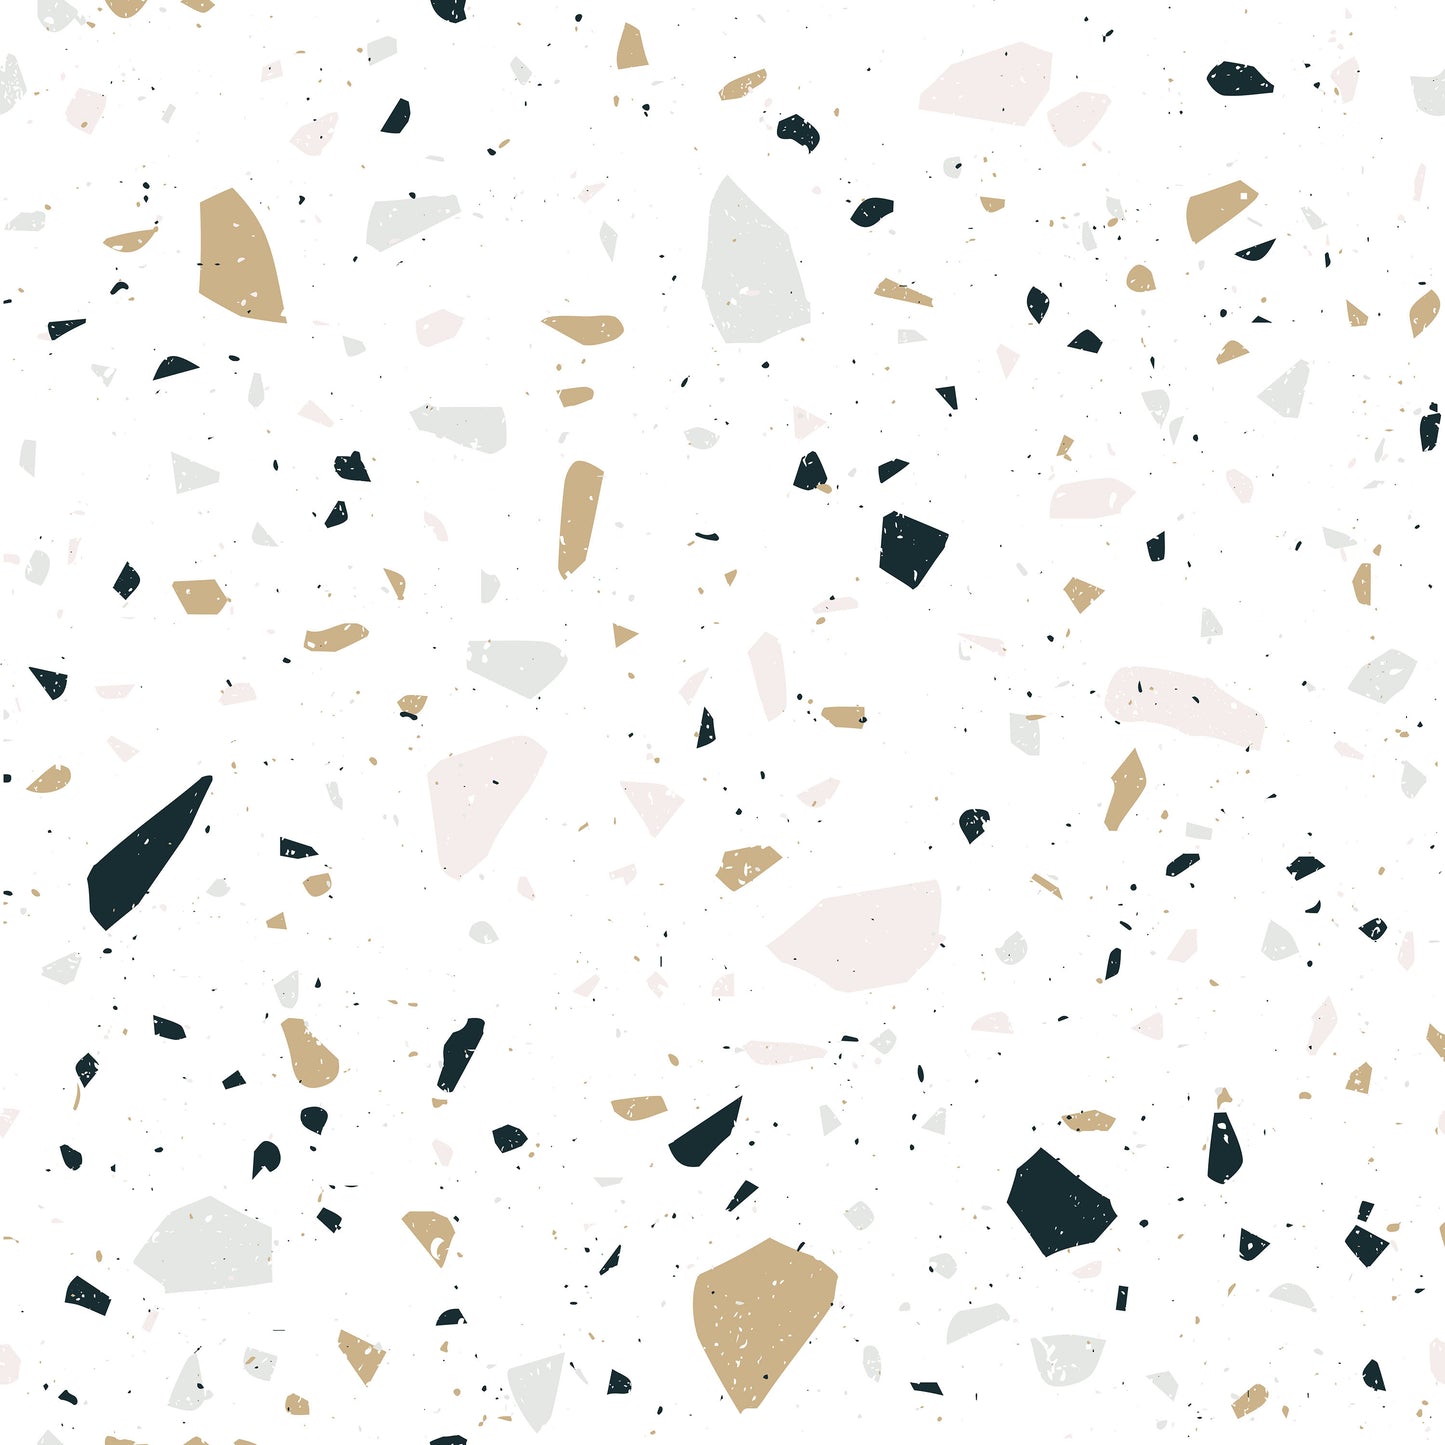 Trendy navy blue, grey/gray and beige terrazzo medium print on white background easy to install and remove peel and stick custom wallpaper available in different lengths/sizes locally created and printed in Canada wallpaper. Washable, durable, commercial grade, removable and waterproof.